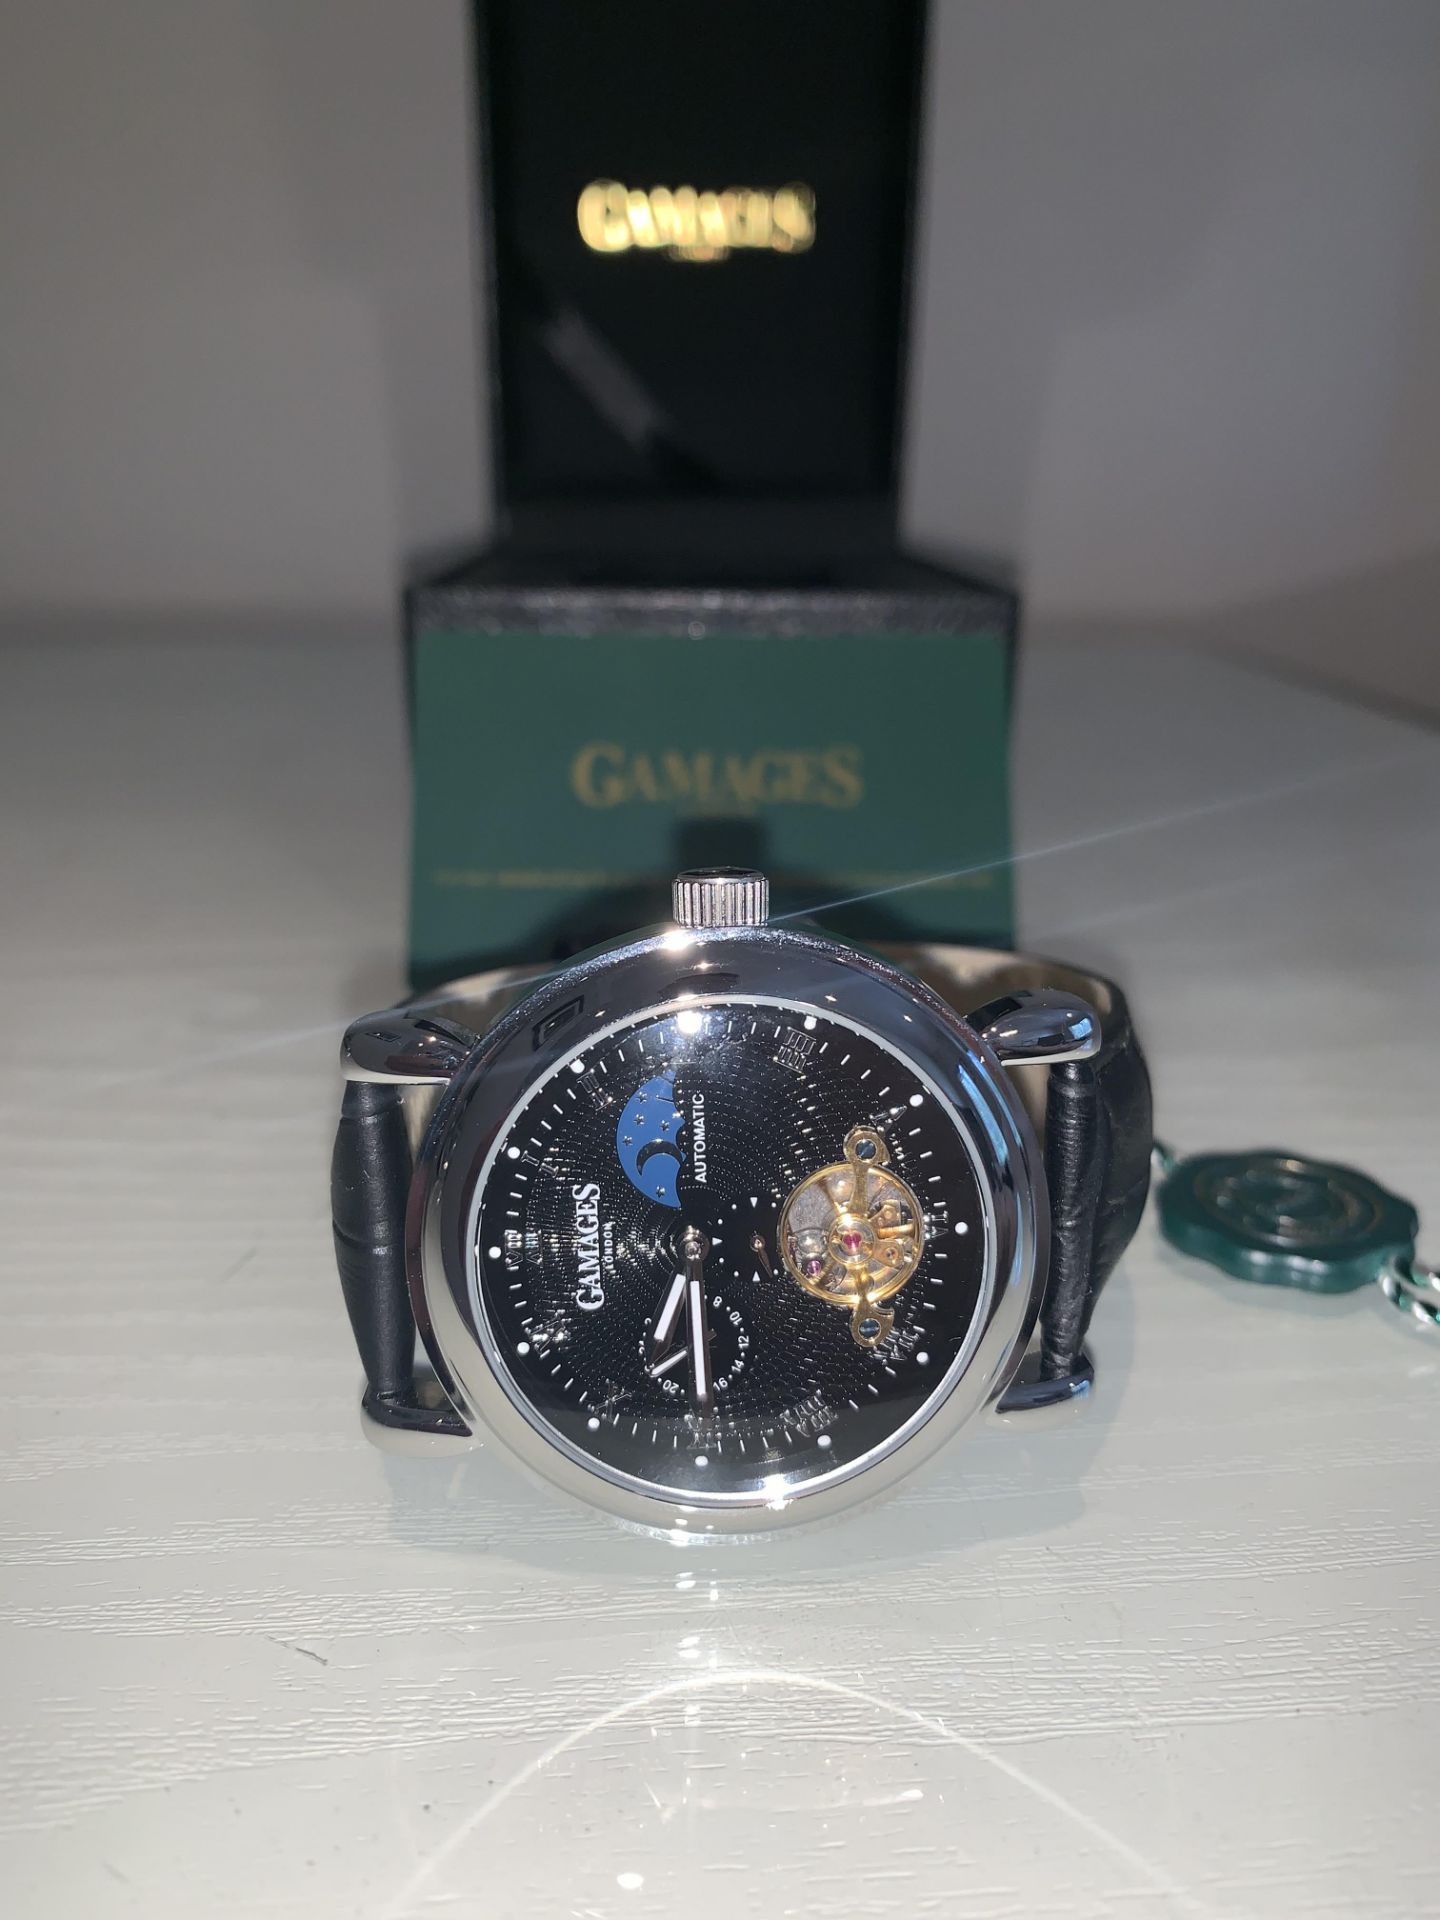 Limited Edition Hand Assembled GAMAGES Moon Phase Automatic Steel – 5 Year Warranty & Free Delivery - Image 5 of 6